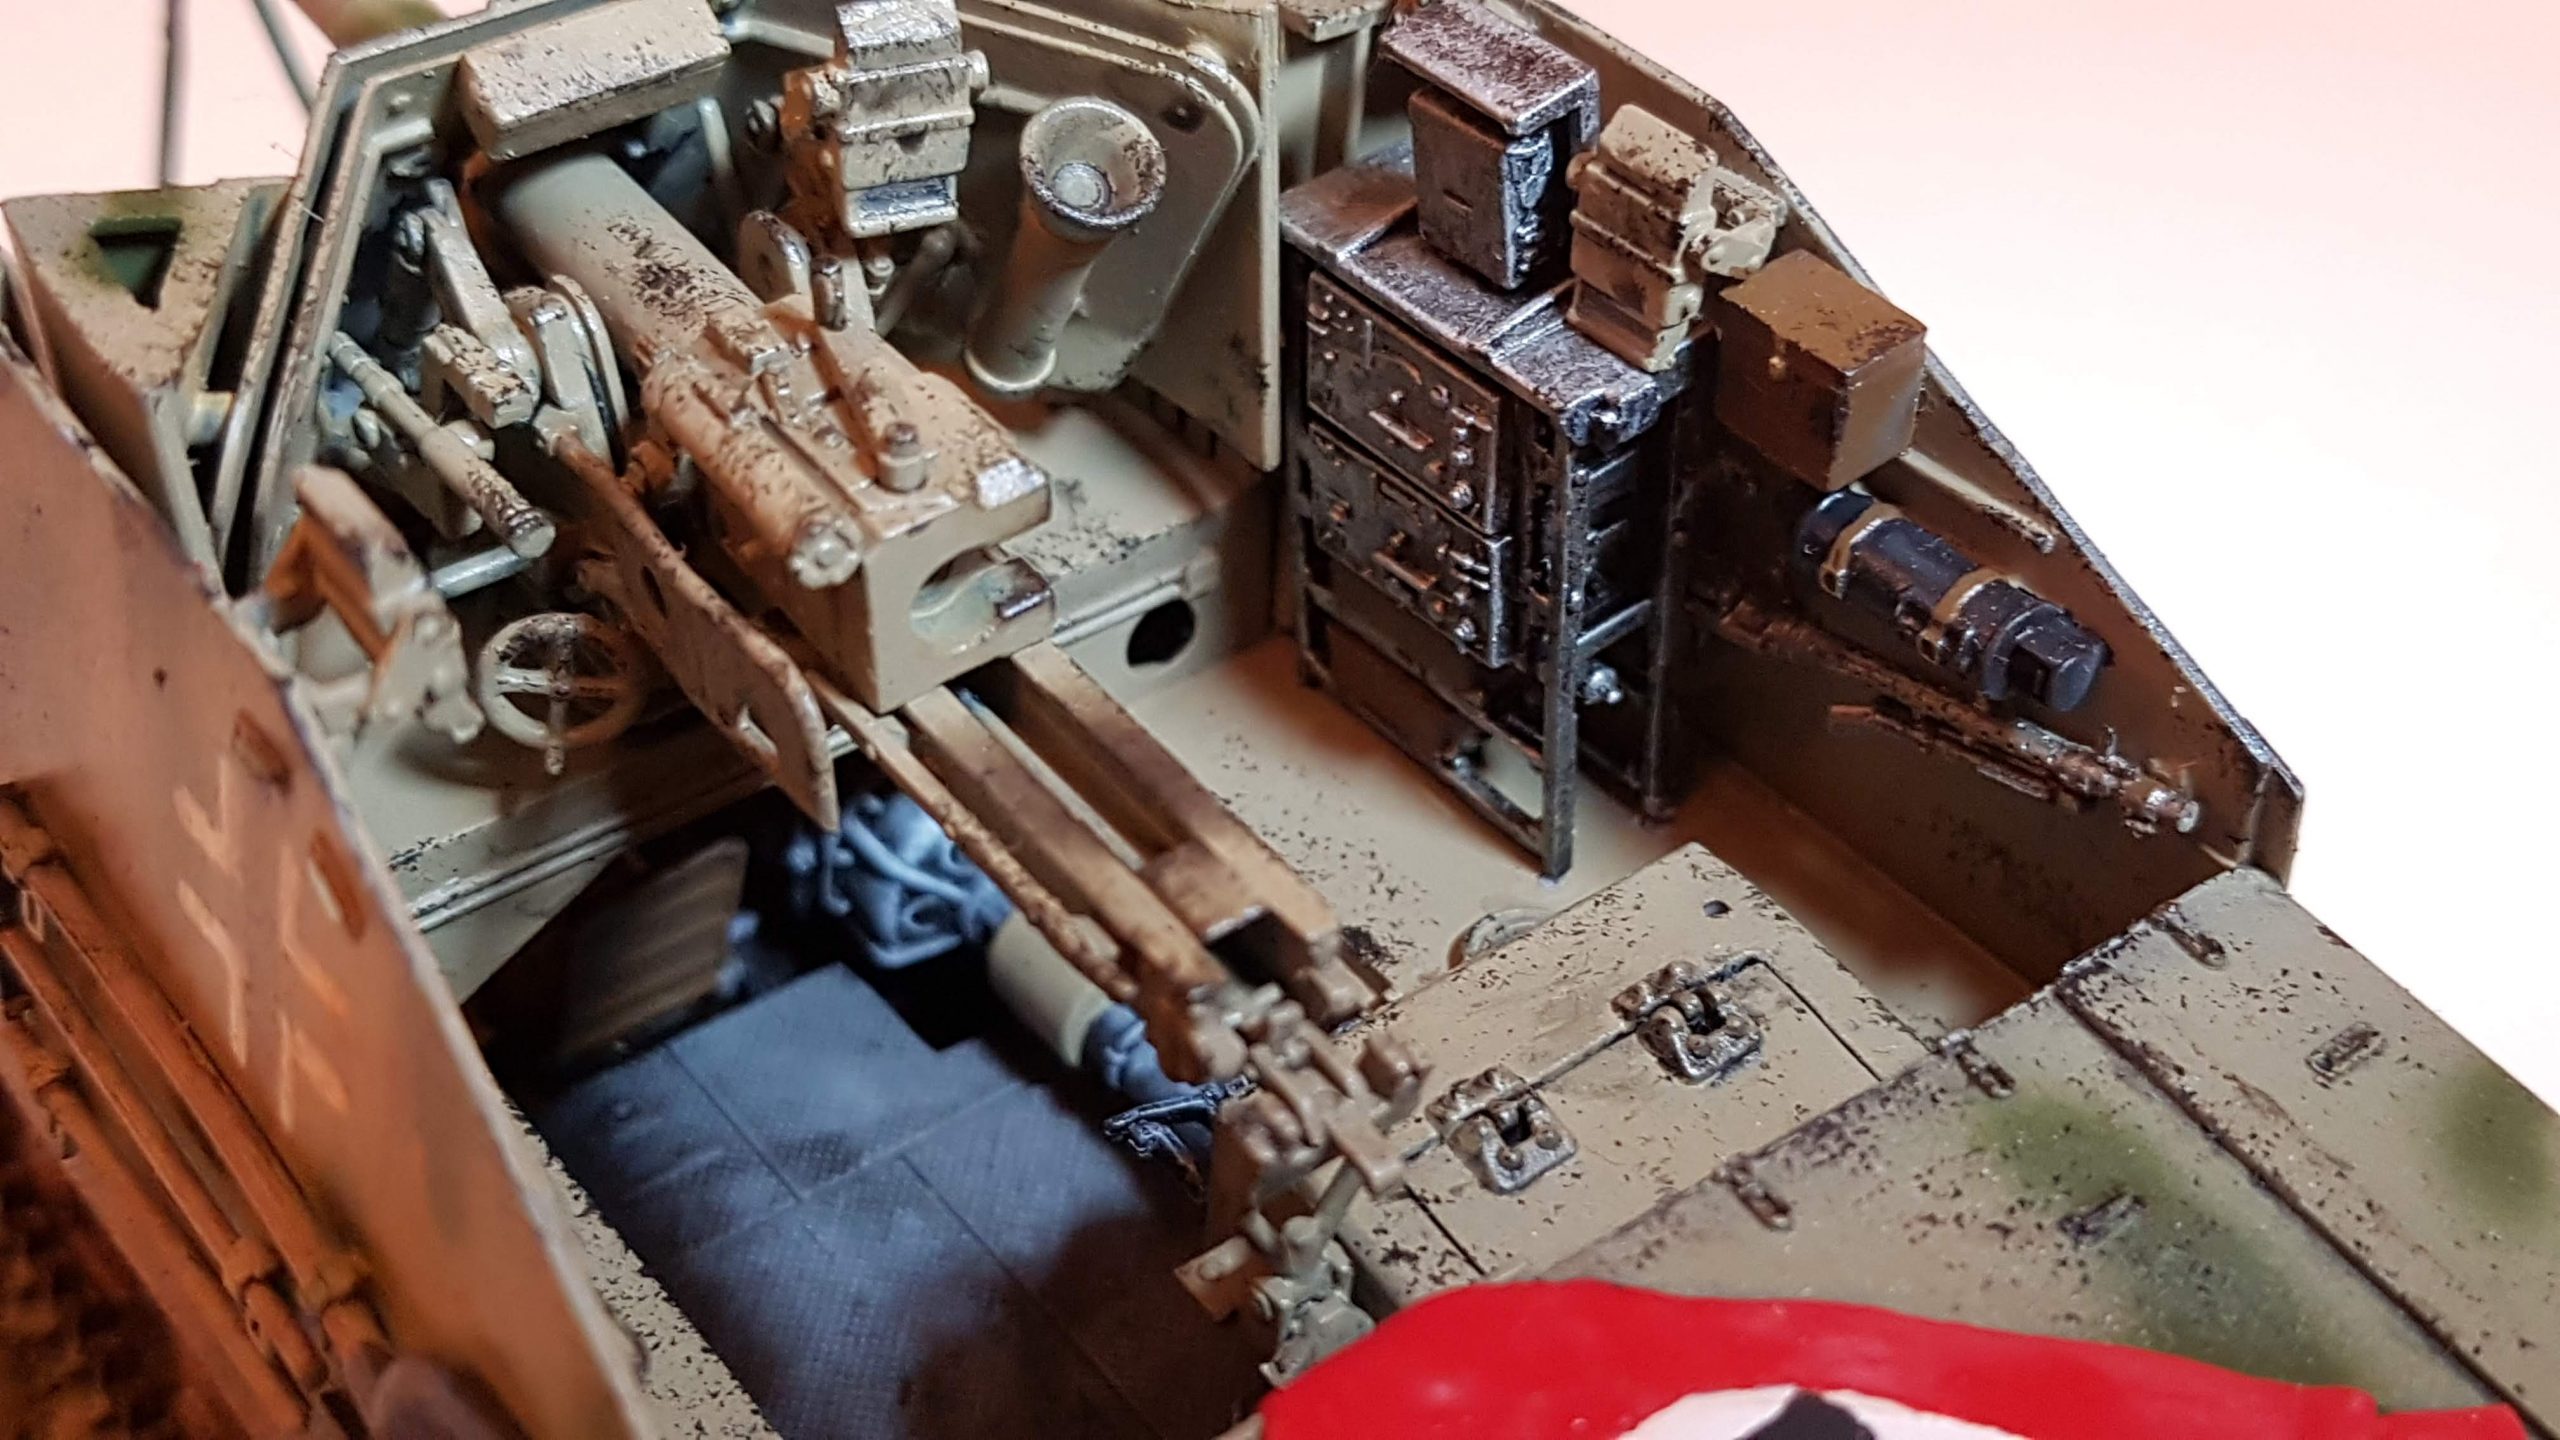 Marder 2 (WW2) - View 5 - 1/35 Scale - Built By Wright Built - Dragon Models